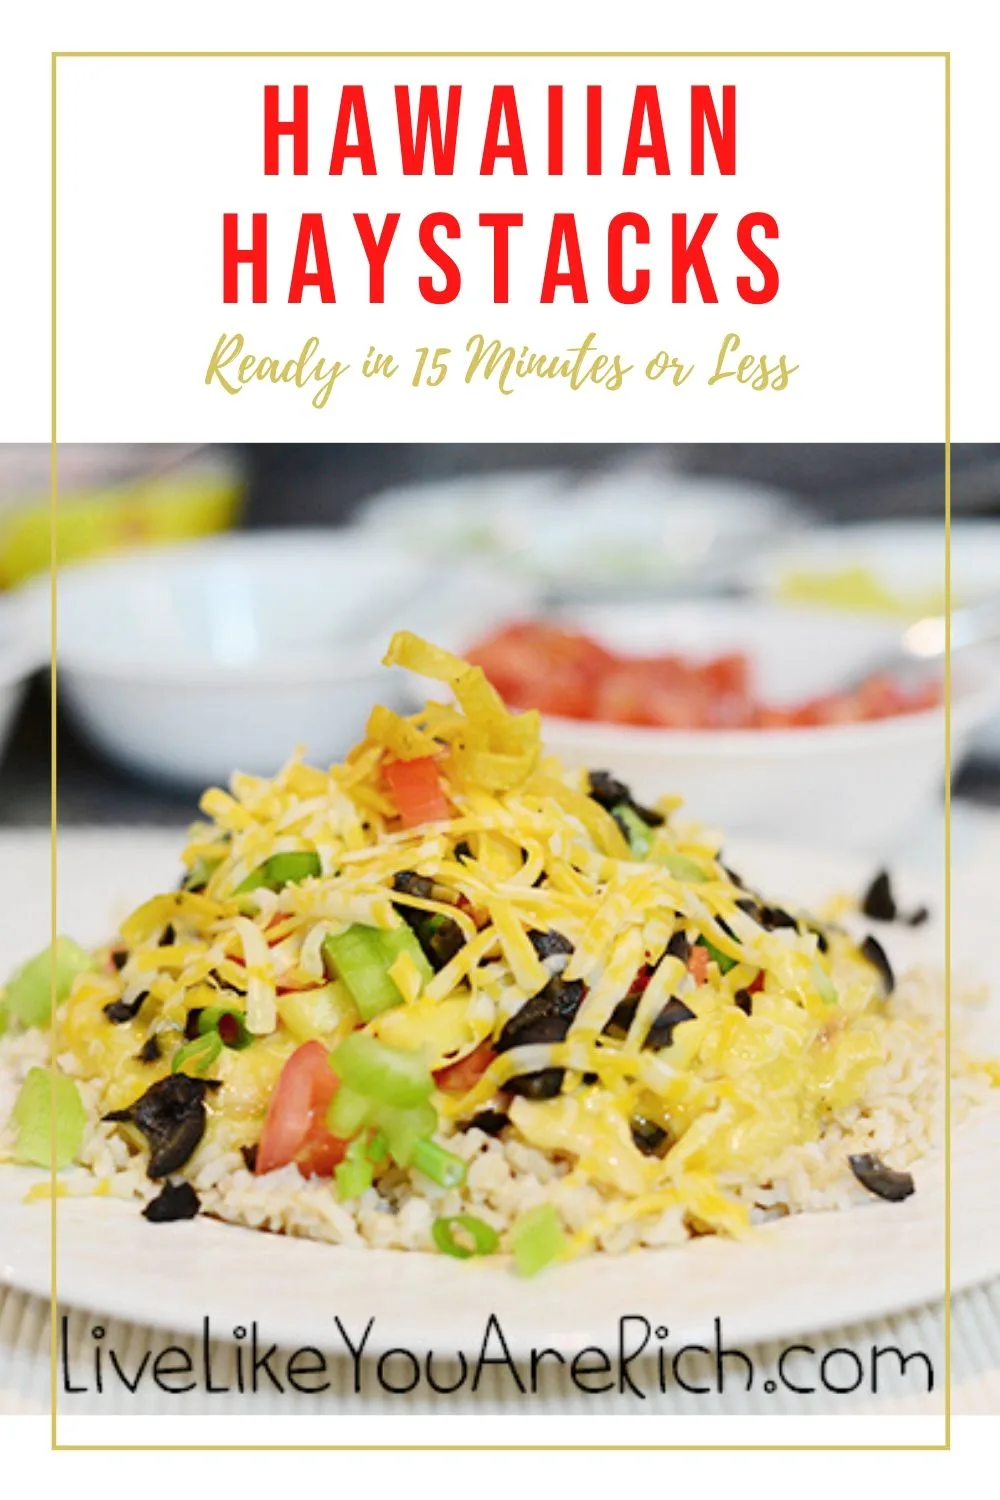 This Hawaiian Haystacks recipe has been in the family for years and is very easy to make. Many are looking for quick yet healthy, filling, and delicious meals for a holiday gathering. So I decided I’d share a family favorite. 